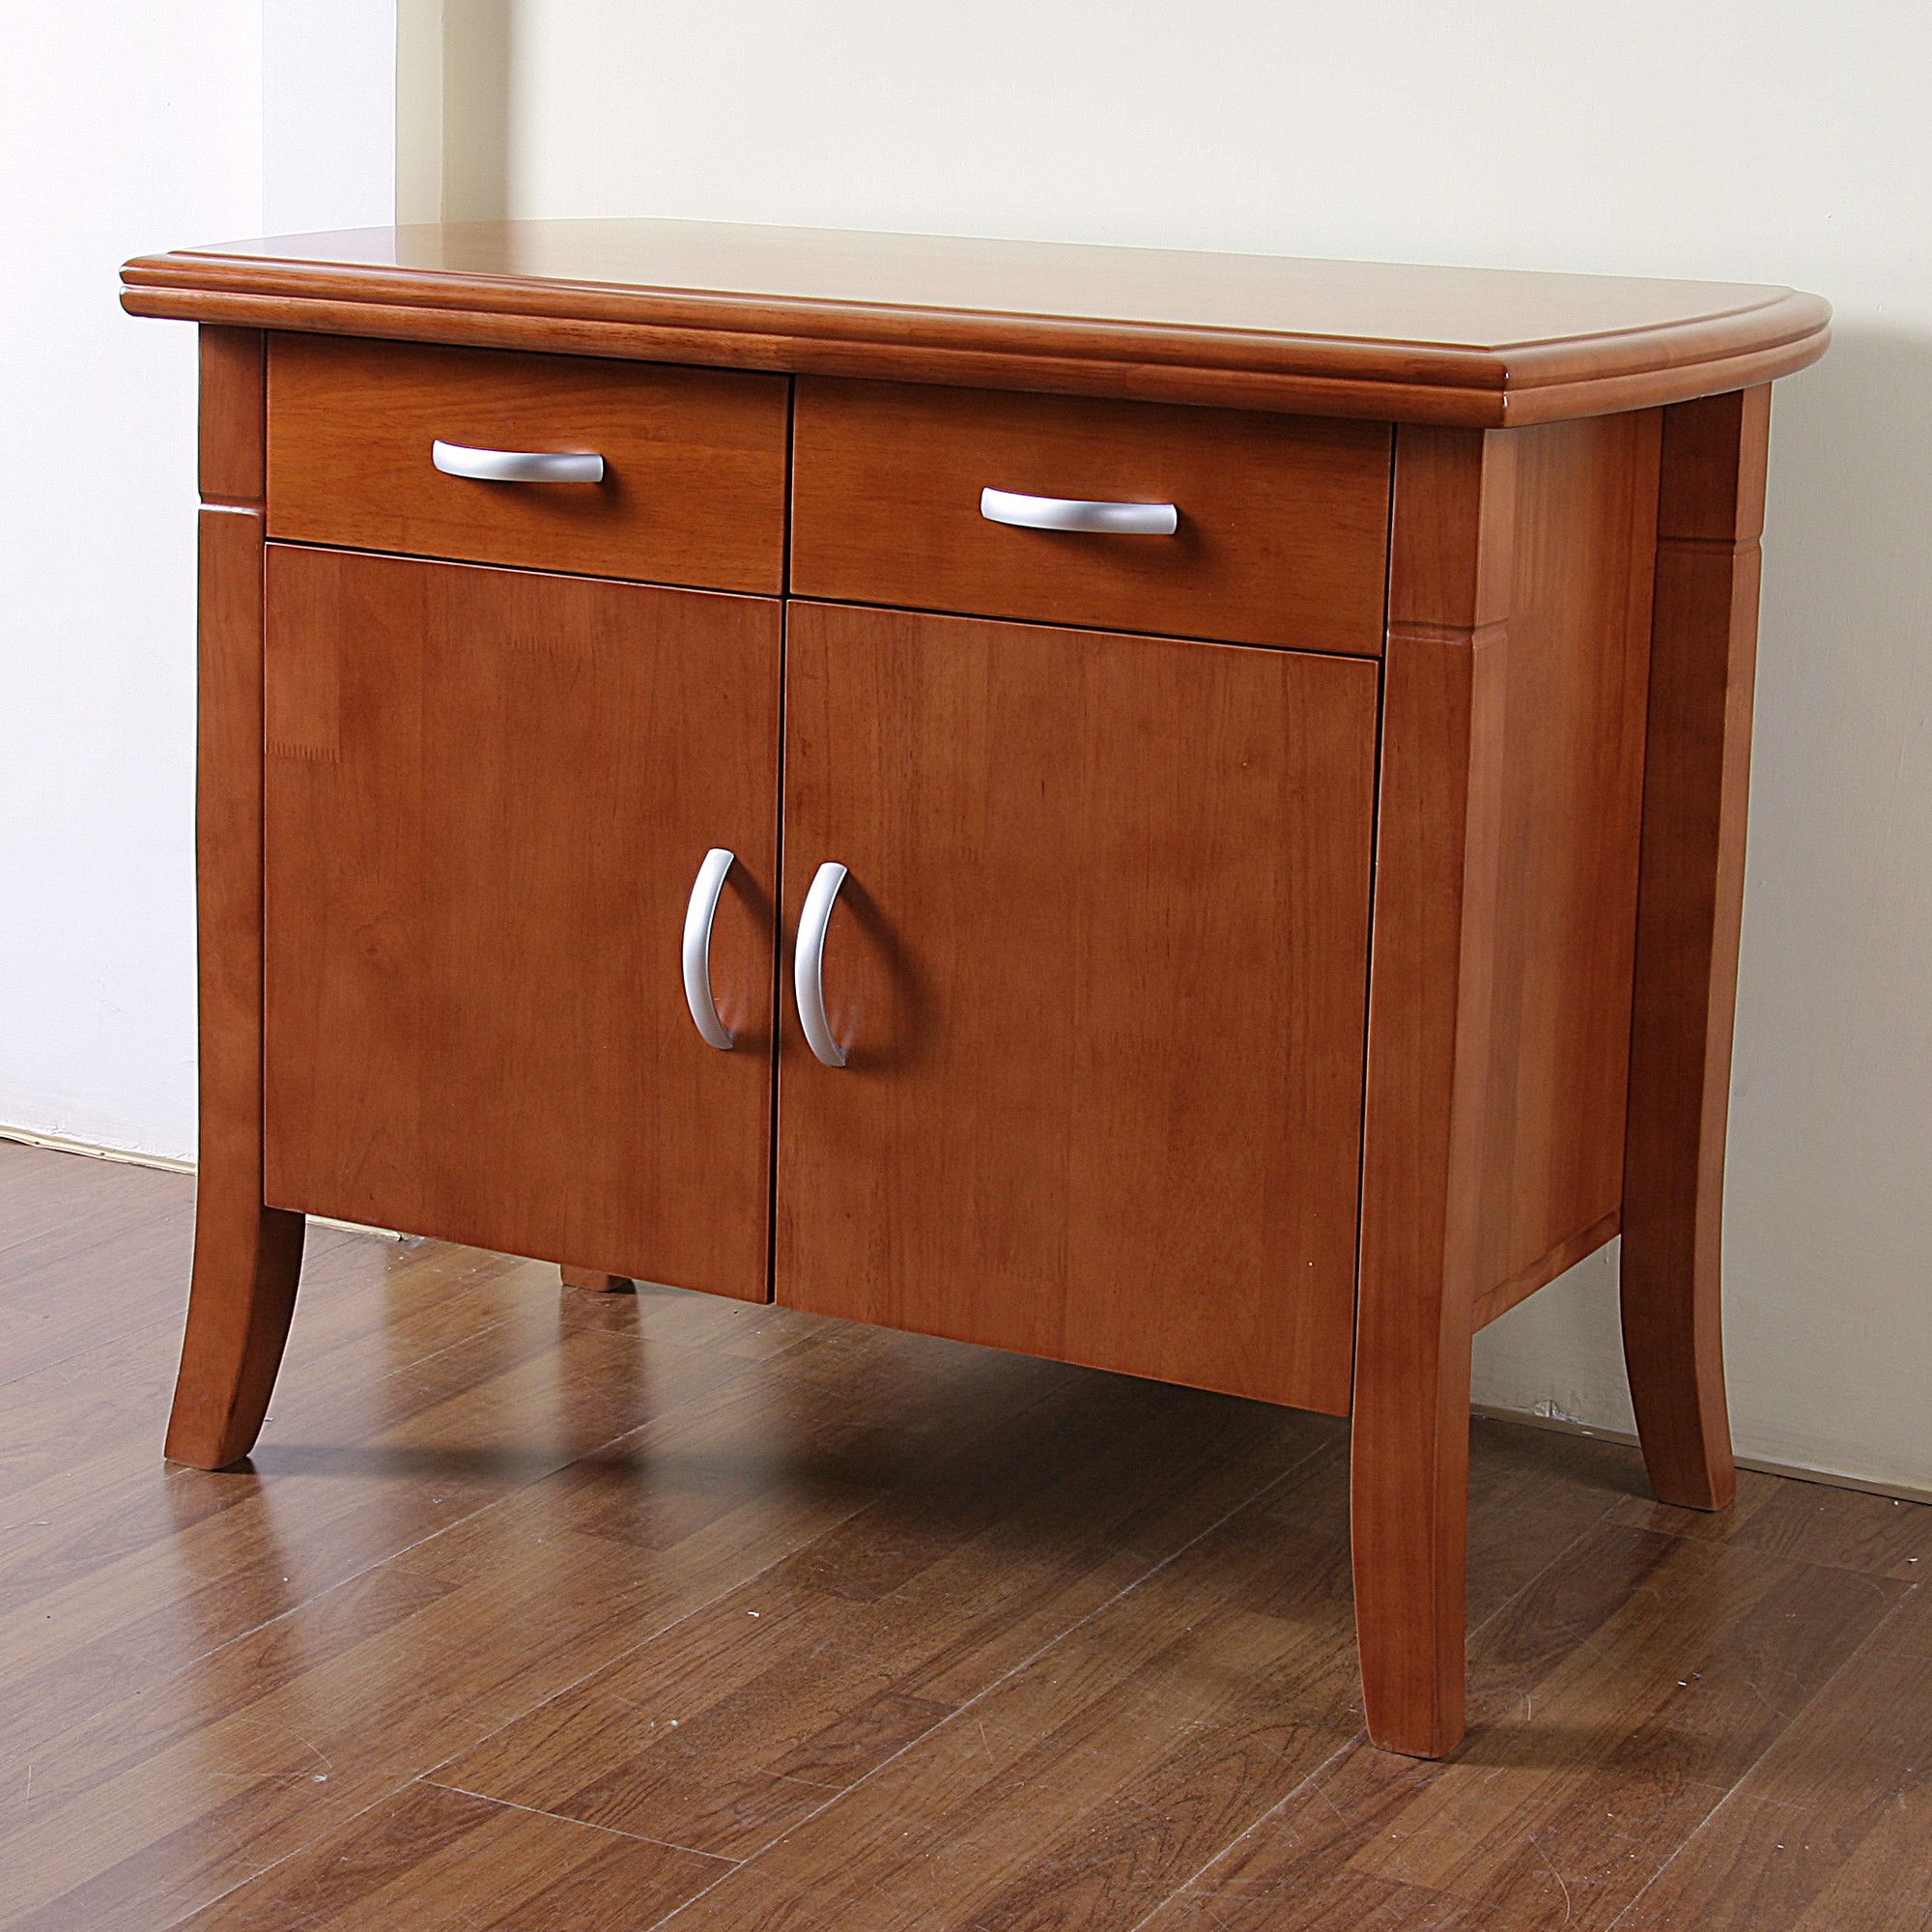 G&P Furniture Windsor House Sideboard - Cherry at Tesco Direct